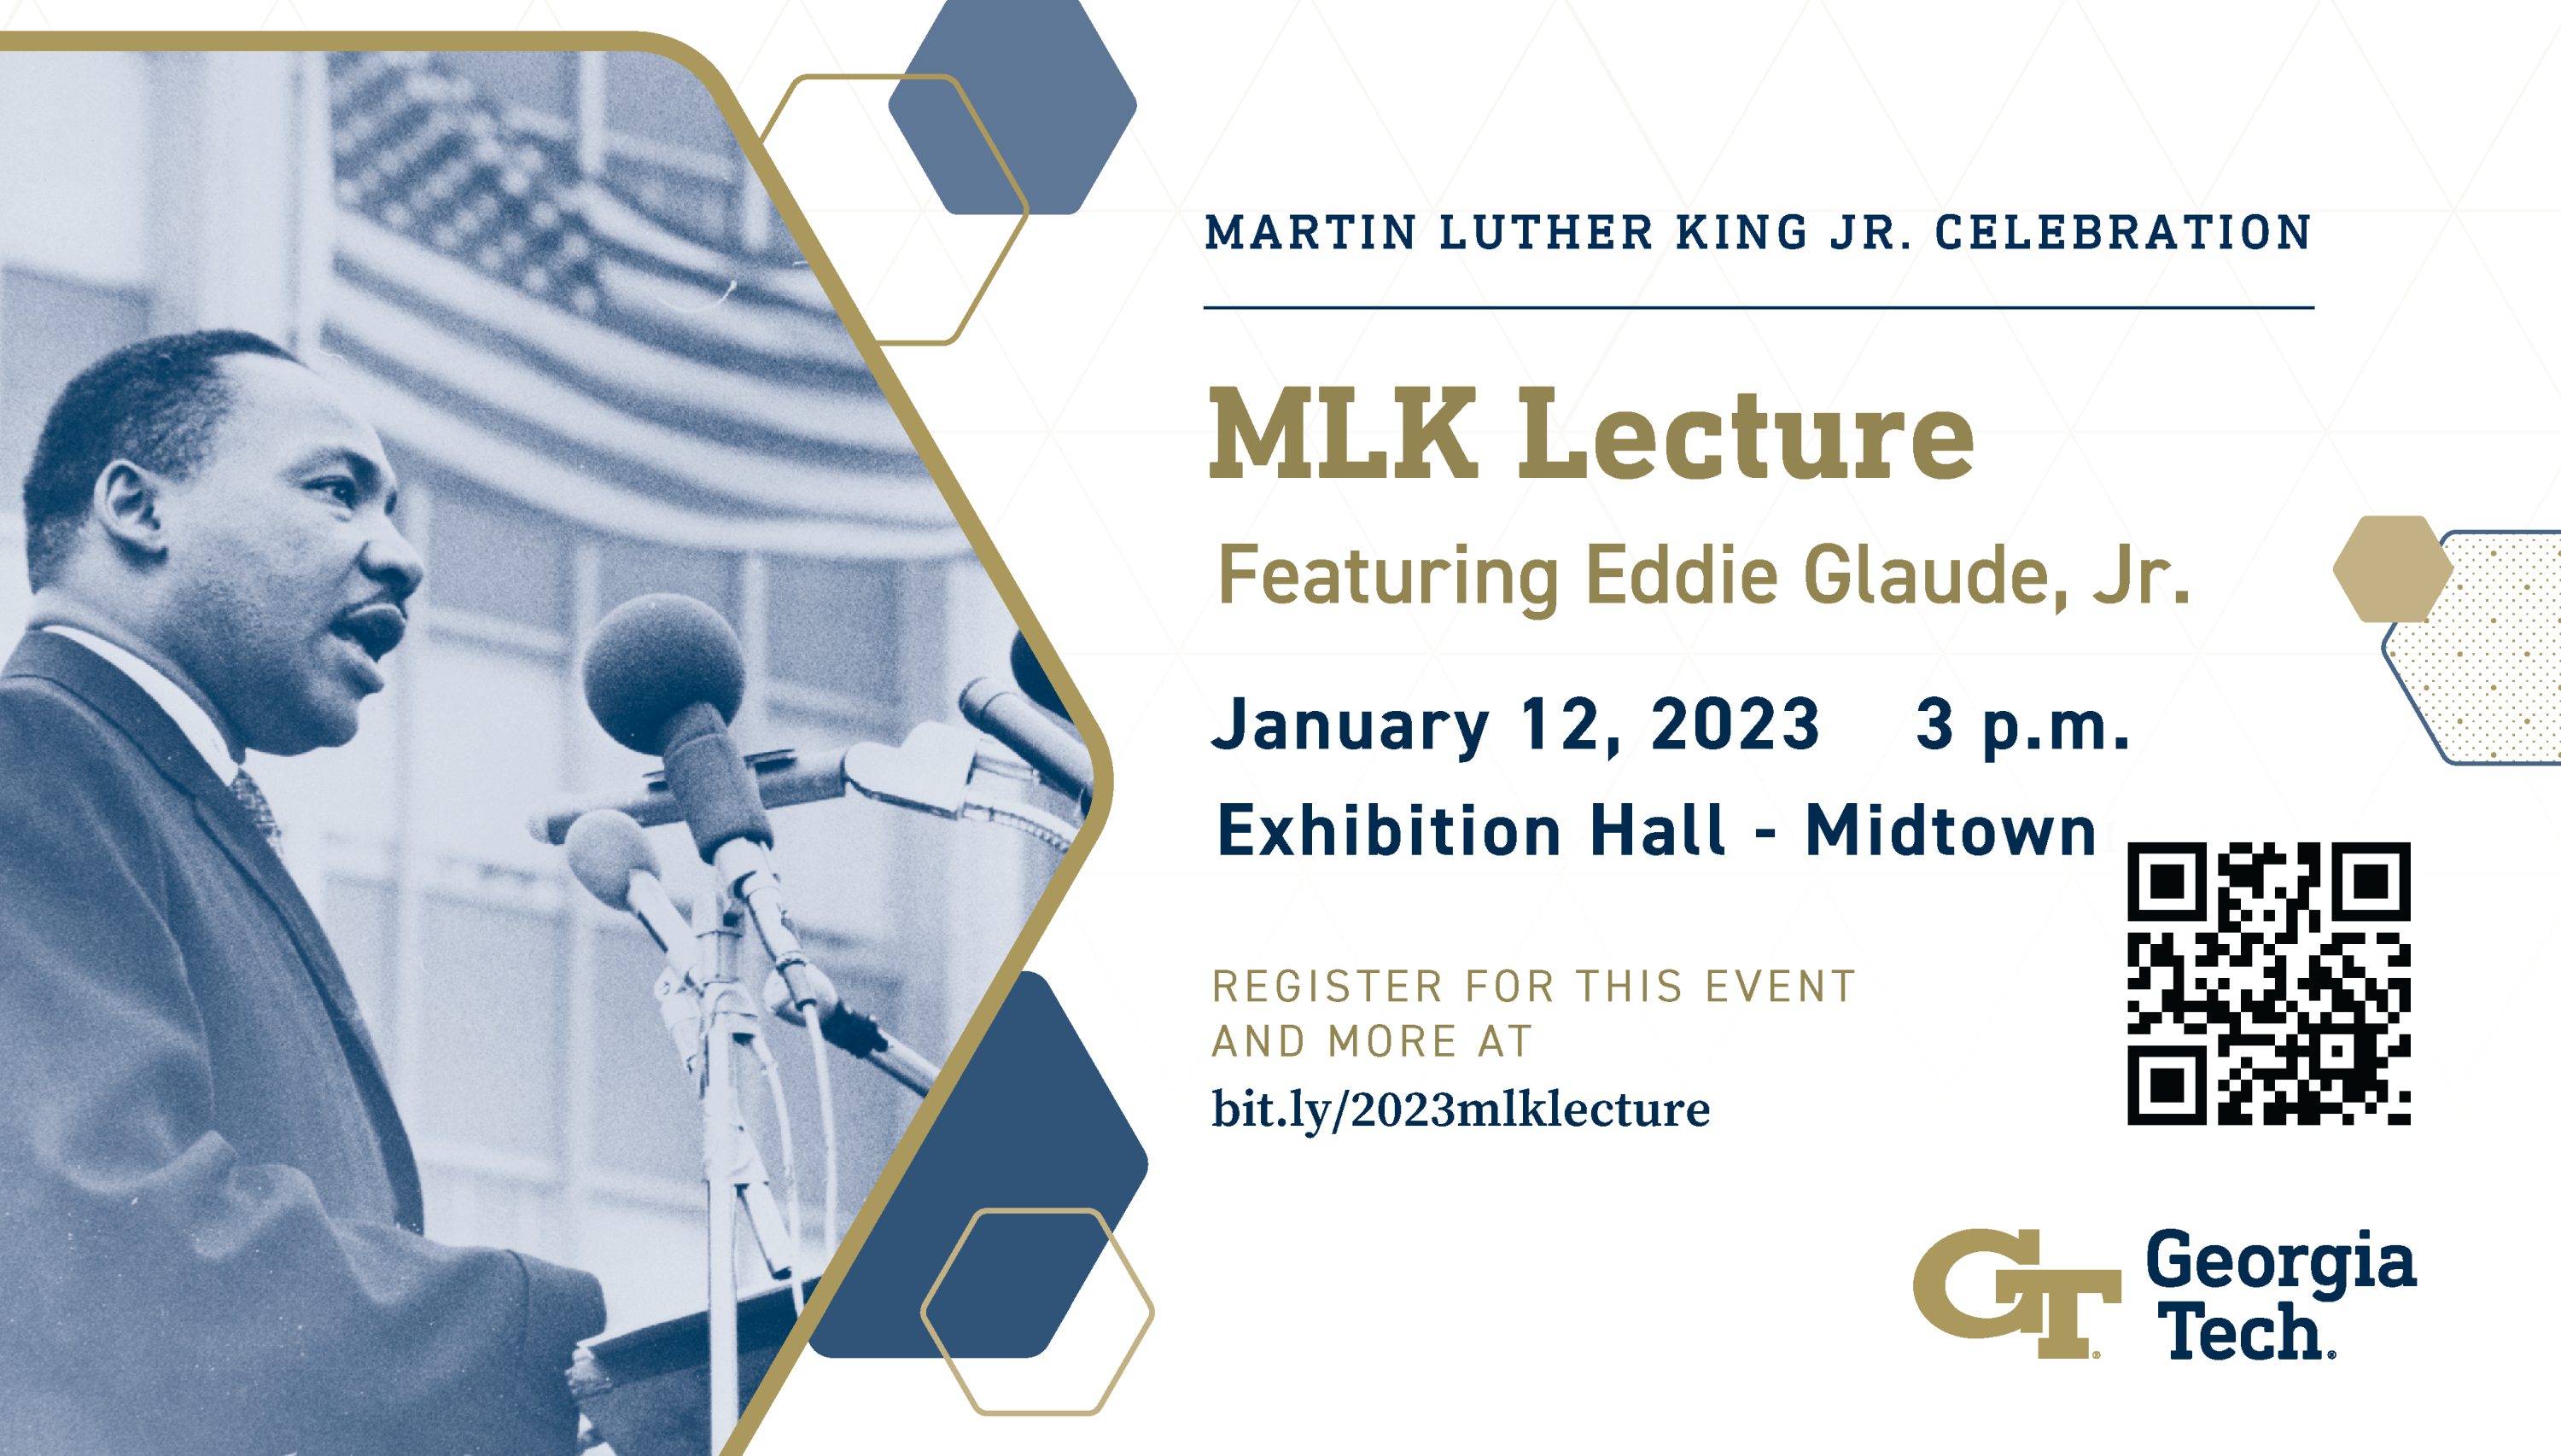 2023 MLK Lecture featuring Eddie Glaude, Jr., Thursday, January 12, 2023 at 3 pm in the Exhibition Hall, Midtown Ballroom